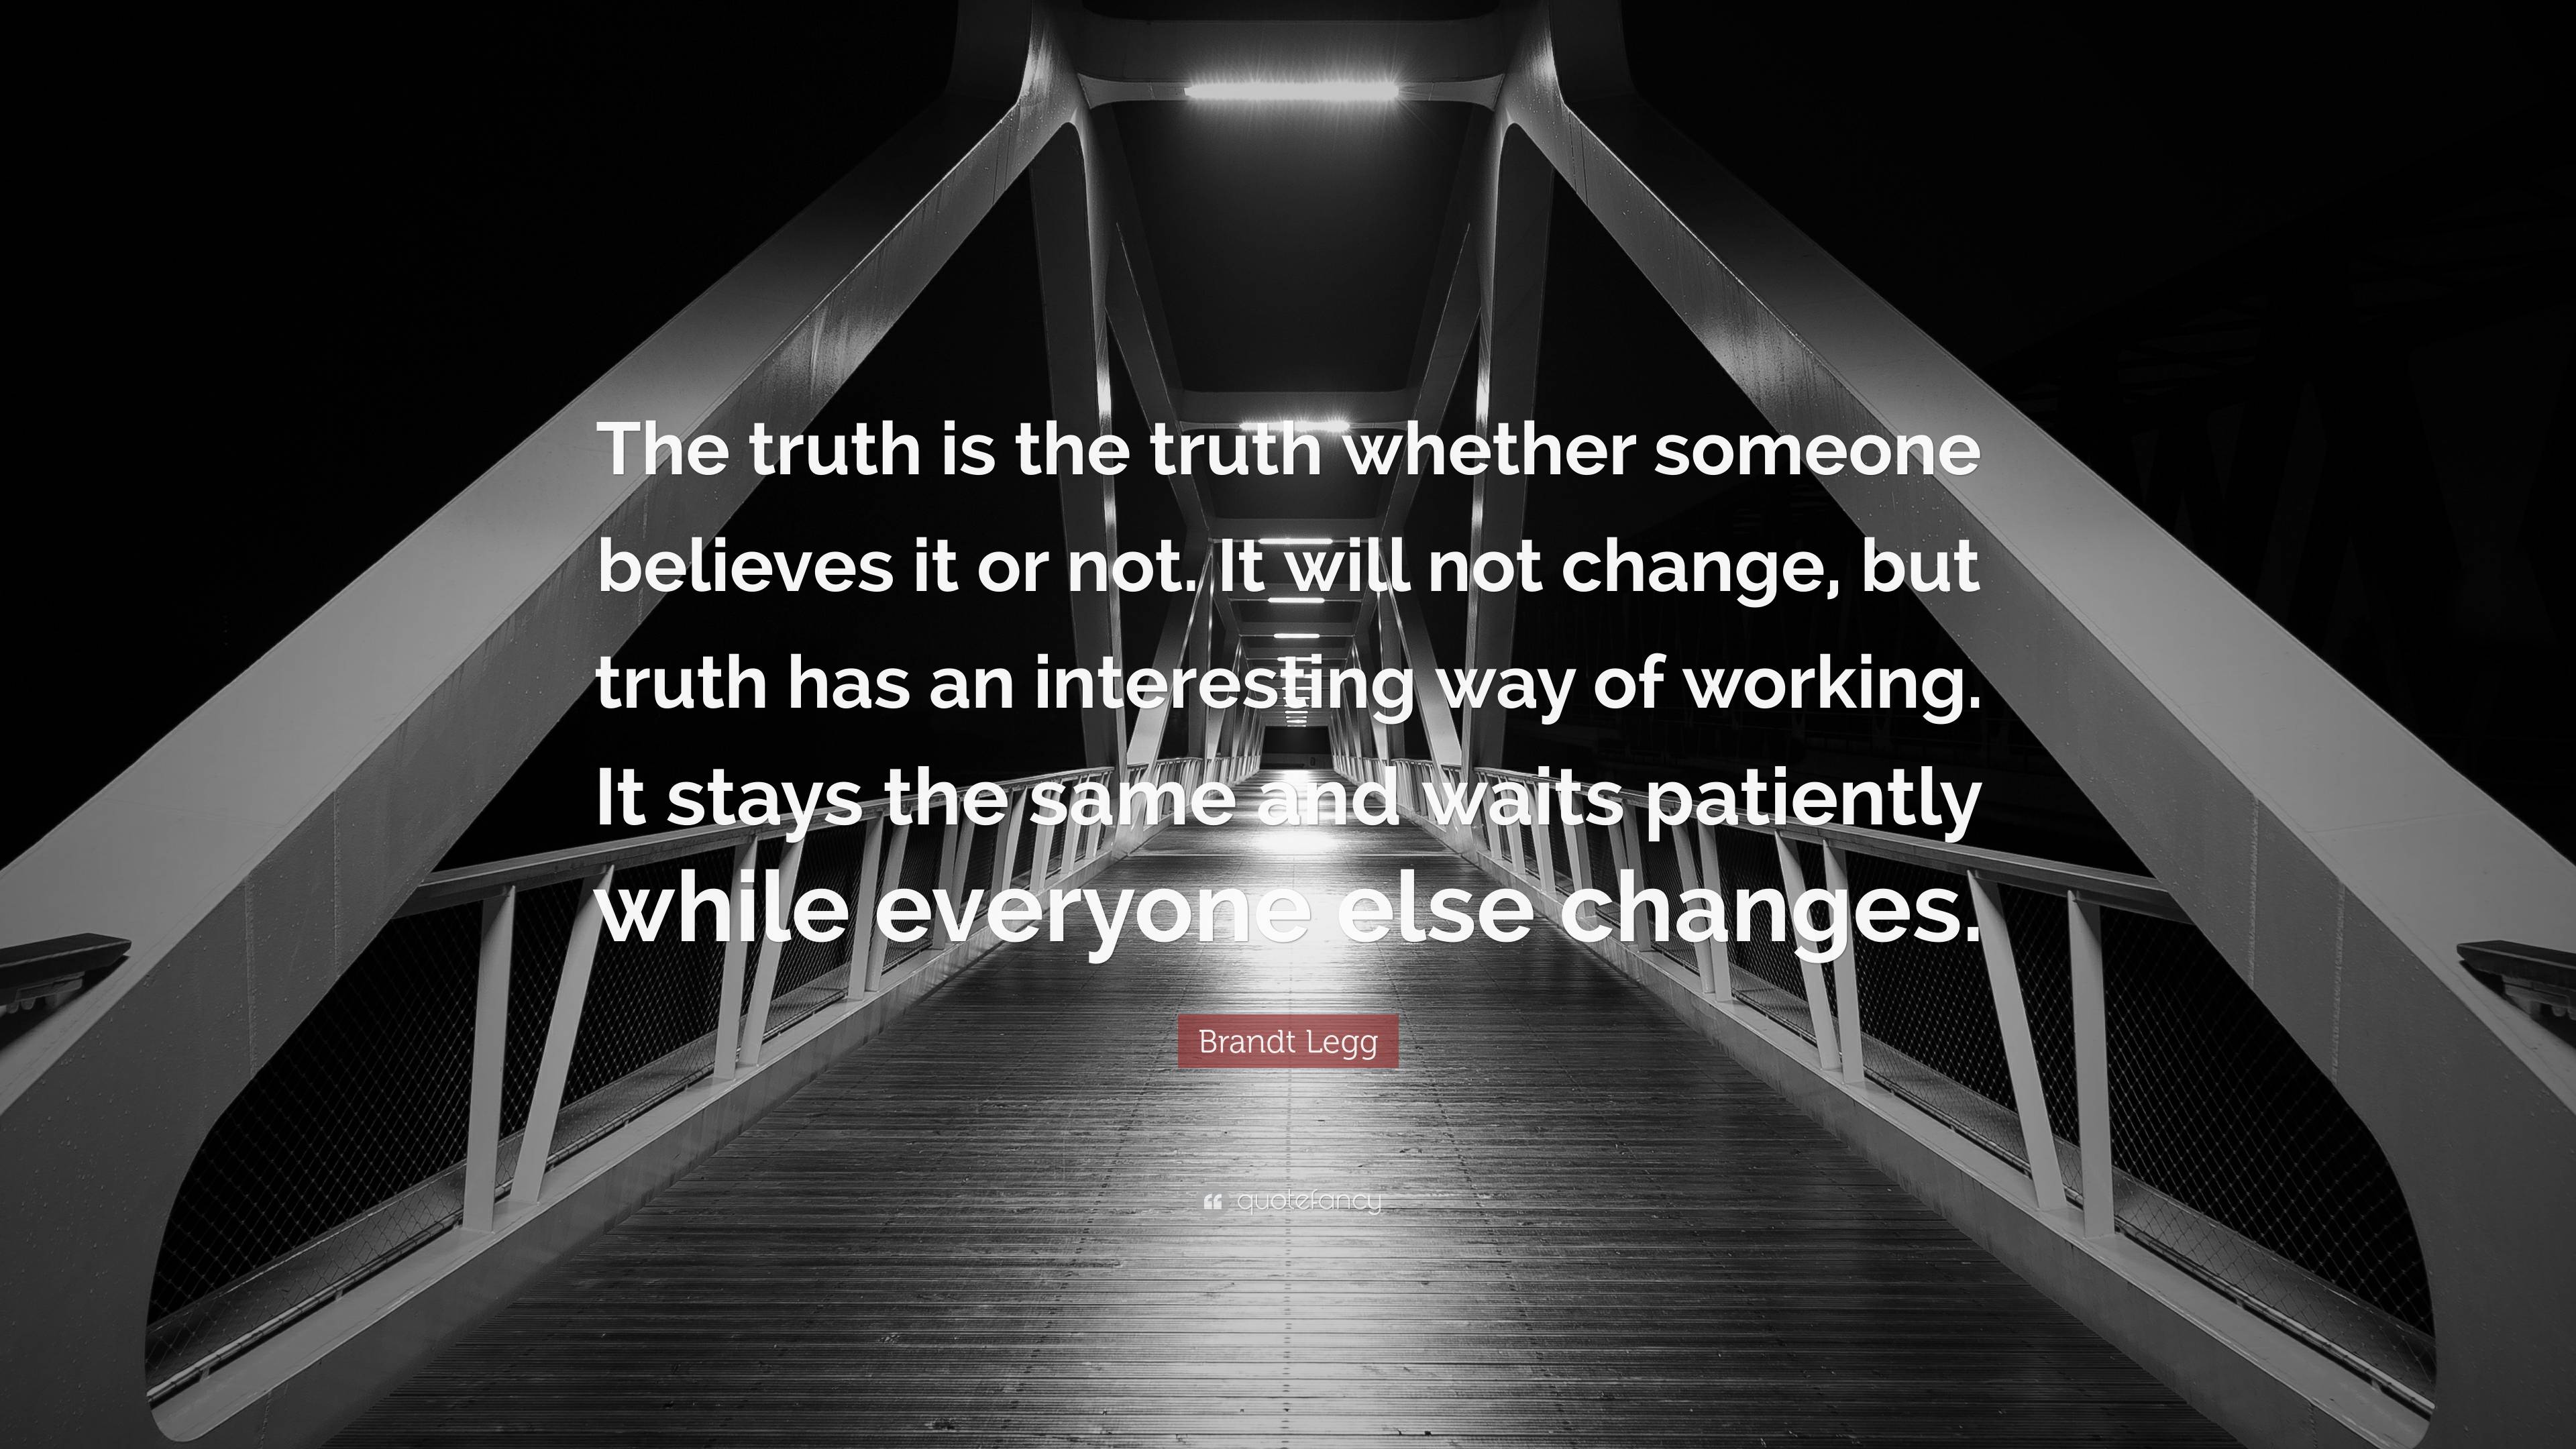 Brandt Legg Quote: “The truth is the truth whether someone believes it ...